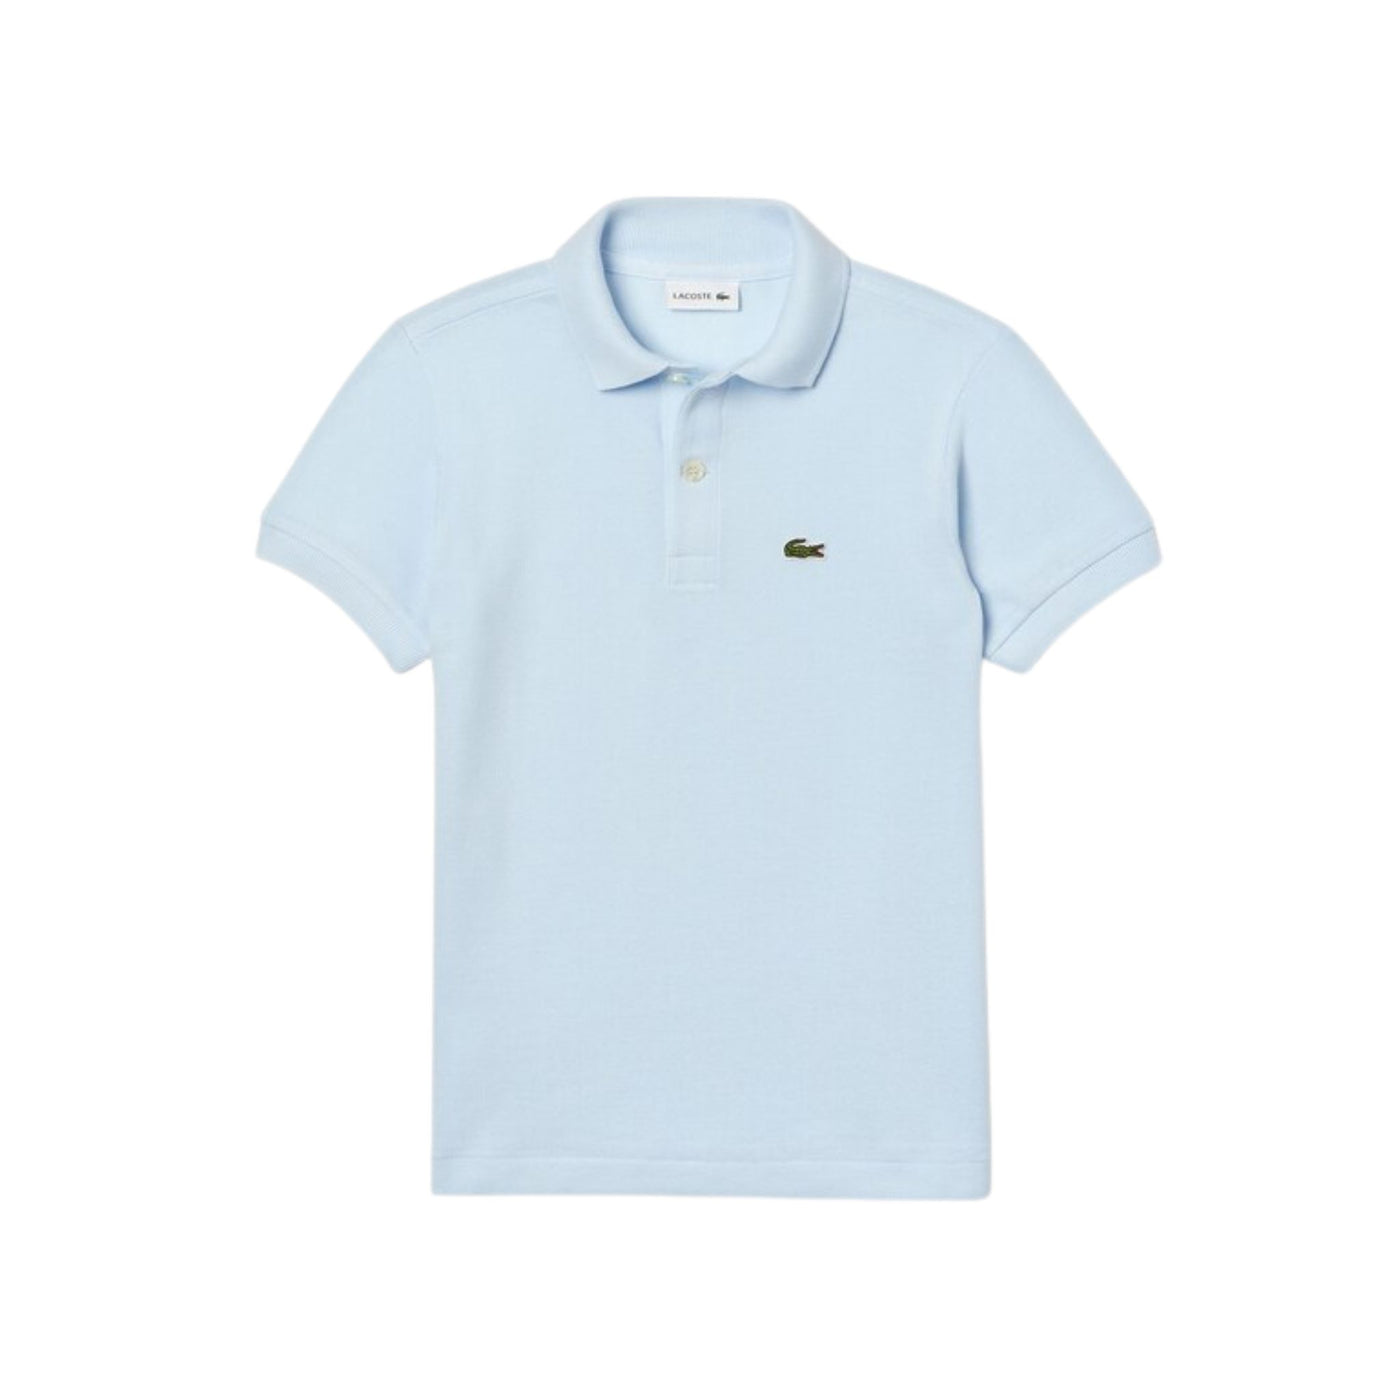 Boy's polo shirt in solid colour